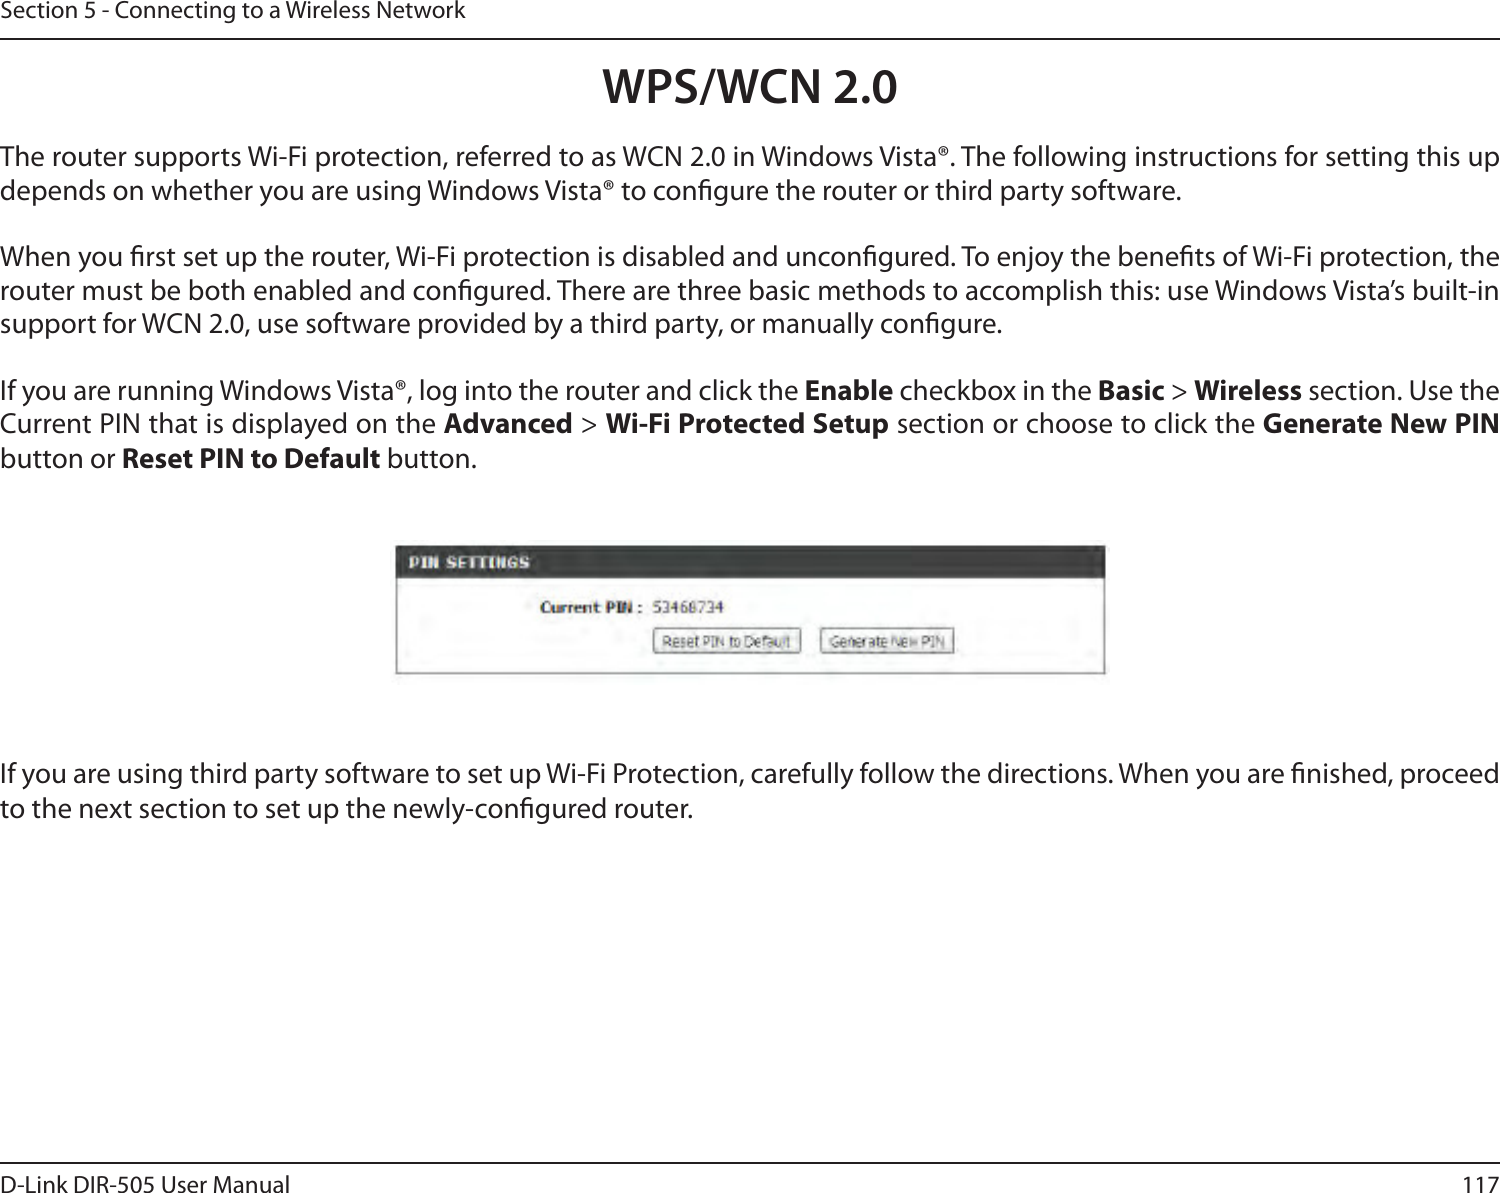 117D-Link DIR-505 User ManualSection 5 - Connecting to a Wireless NetworkWPS/WCN 2.0The router supports Wi-Fi protection, referred to as WCN 2.0 in Windows Vista®. The following instructions for setting this up depends on whether you are using Windows Vista® to congure the router or third party software.        When you rst set up the router, Wi-Fi protection is disabled and uncongured. To enjoy the benets of Wi-Fi protection, the router must be both enabled and congured. There are three basic methods to accomplish this: use Windows Vista’s built-in support for WCN 2.0, use software provided by a third party, or manually congure. If you are running Windows Vista®, log into the router and click the Enable checkbox in the Basic &gt; Wireless section. Use the Current PIN that is displayed on the Advanced &gt; Wi-Fi Protected Setup section or choose to click the Generate New PIN button or Reset PIN to Default button. If you are using third party software to set up Wi-Fi Protection, carefully follow the directions. When you are nished, proceed to the next section to set up the newly-congured router. 